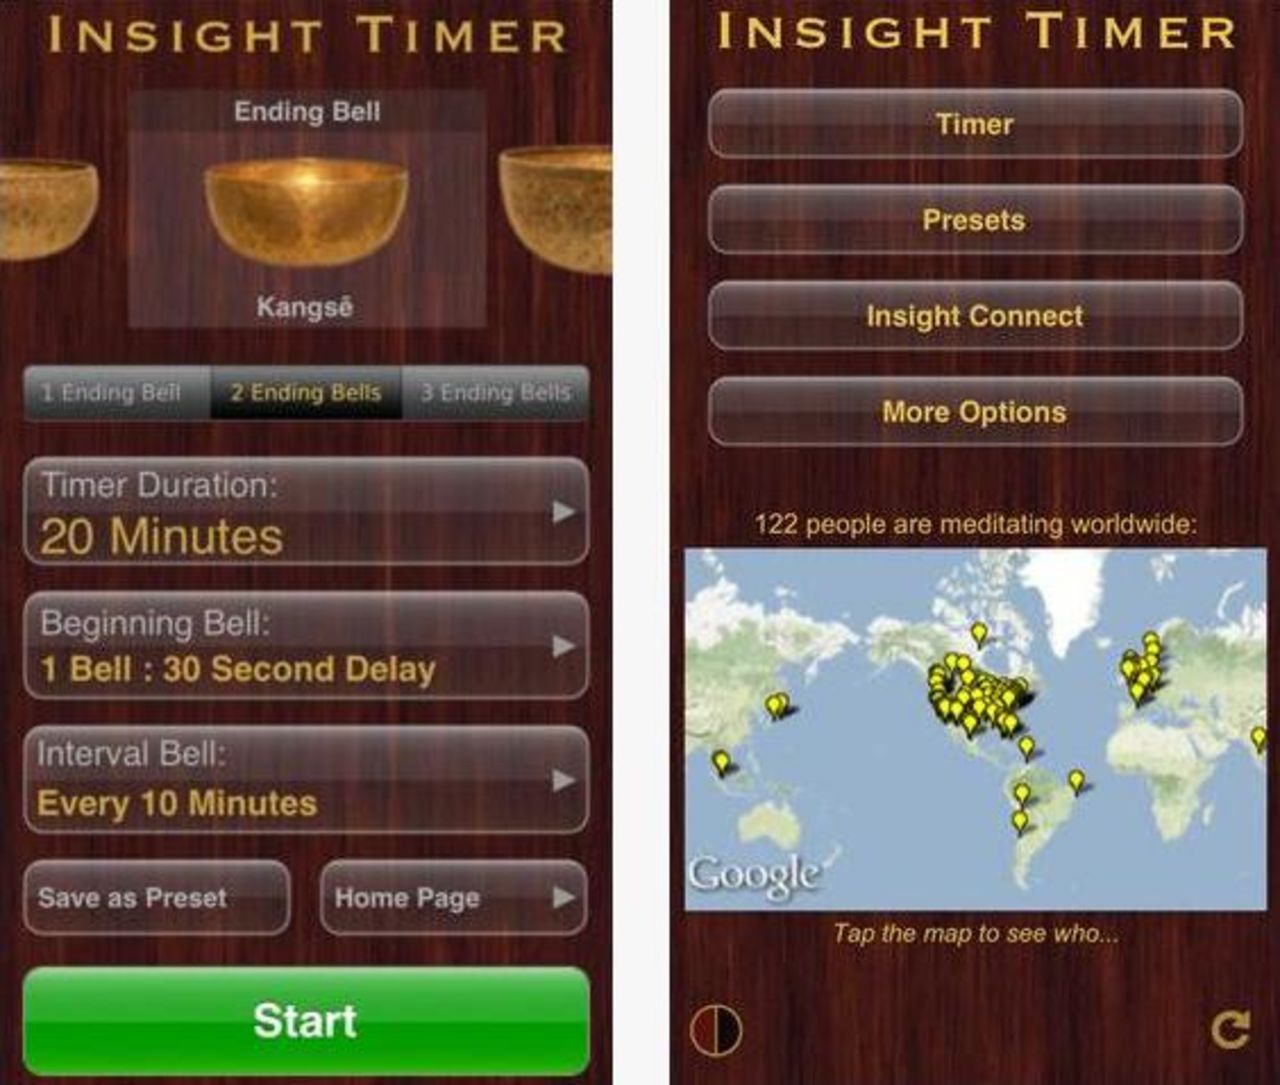 <a href="http://spotlightsix.com" target="_blank" target="_blank">Insight Timer</a>: ($1.99, spotlightsix.com) With the sounds of Tibetan singing bowls as background noise, Insight Timer allows users to track their meditations, is customizable to individual mediatation routines and rewards achievement with insight "milestones." (iPhone, iPod Touch, iPad)